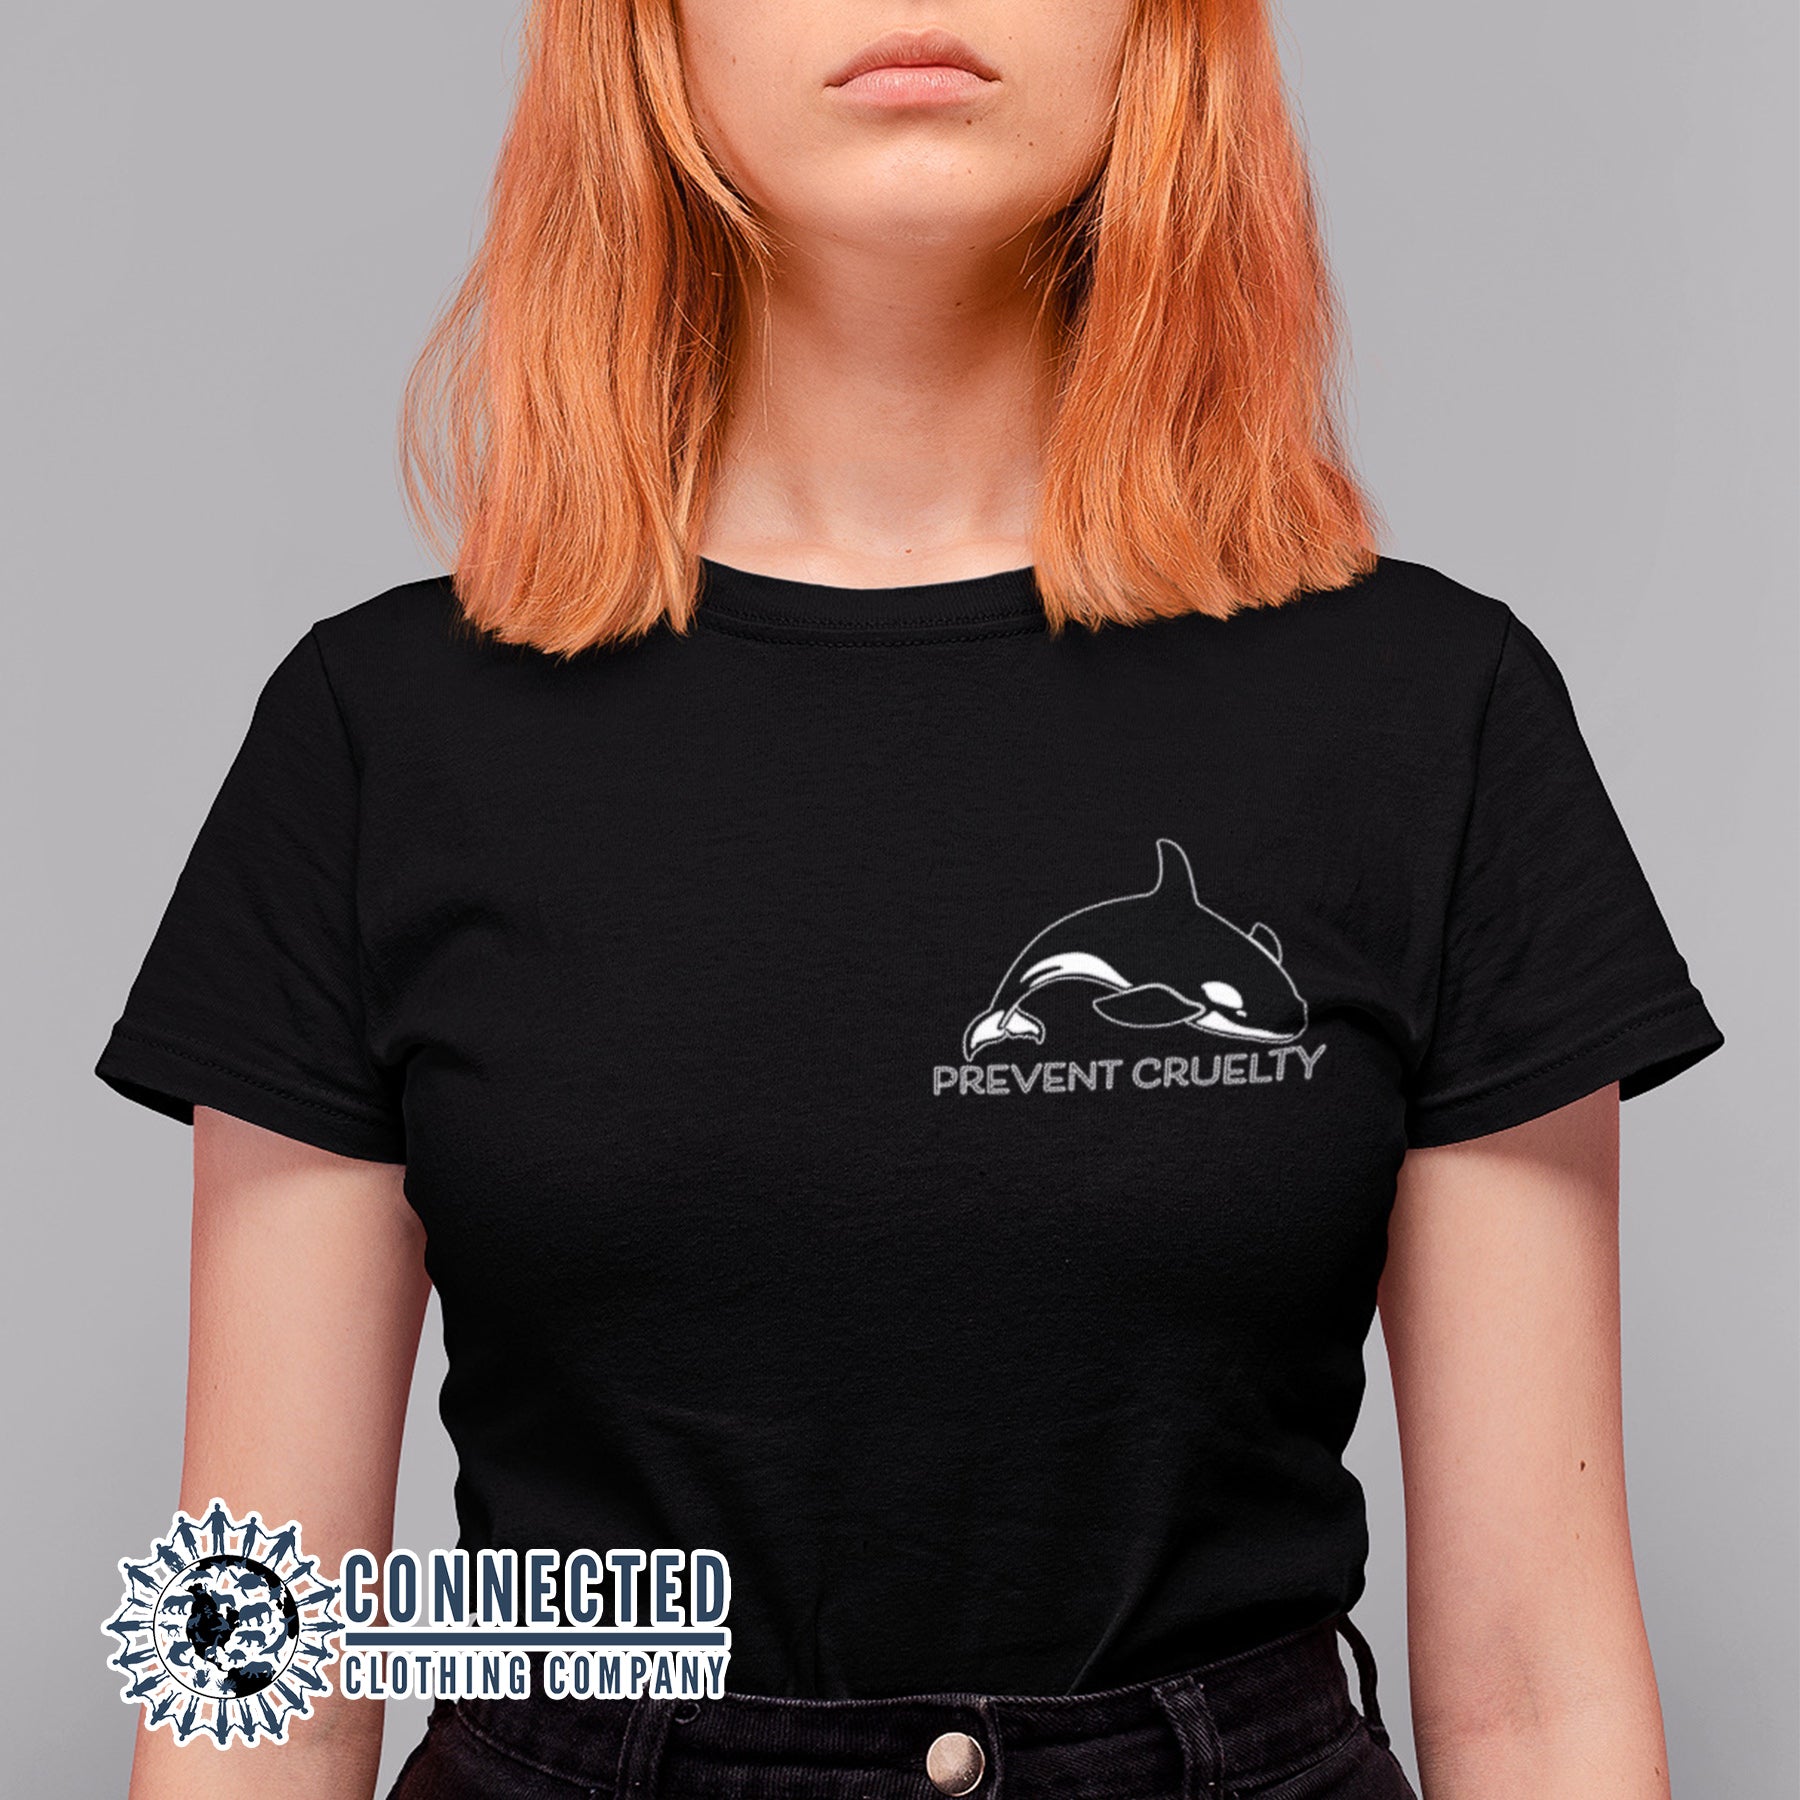 Model Wearing Black Prevent Cruelty Orca Short-Sleeve Tee - Connected Clothing Company - Ethically and Sustainably Made - 10% donated to Humane Society International animal cruelty prevention